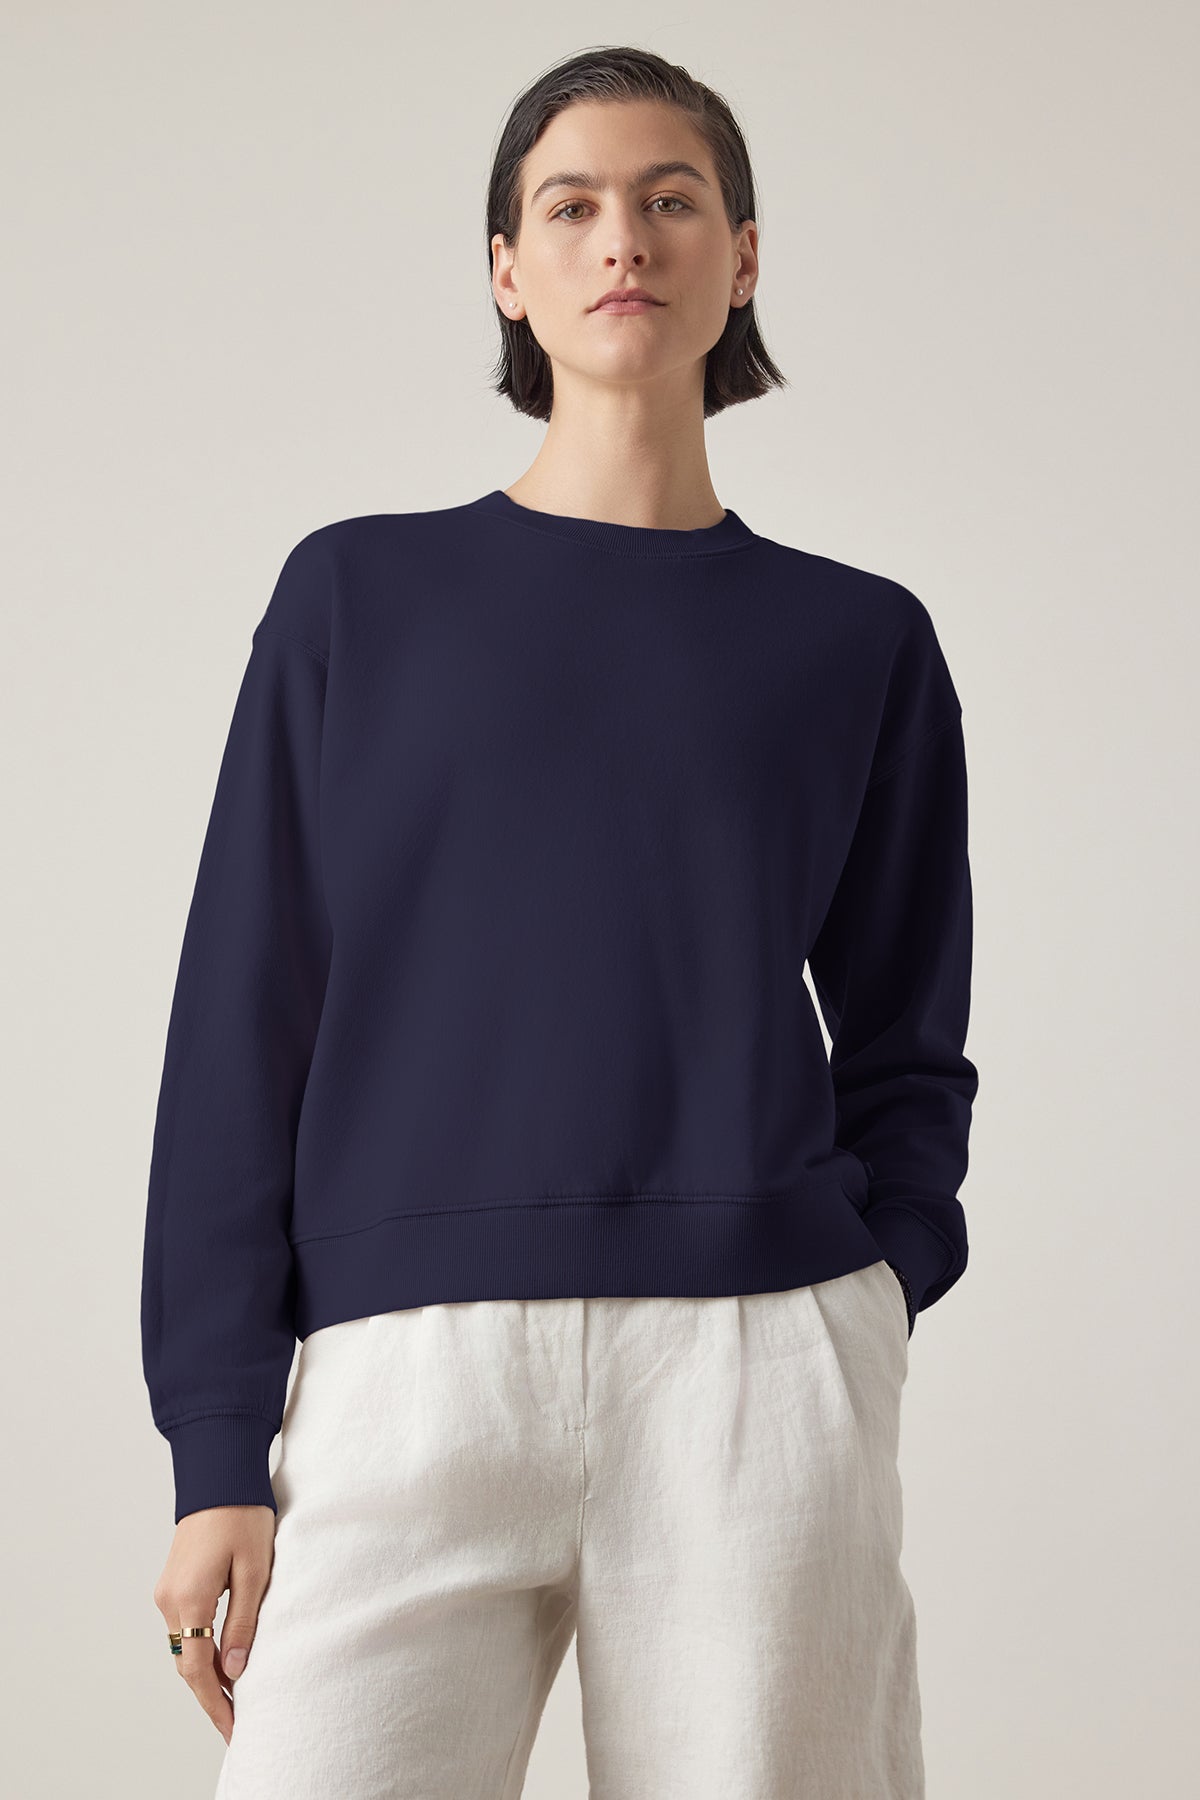   Woman in a Velvet by Jenny Graham Ynez Sweatshirt and white pants standing against a neutral background. 